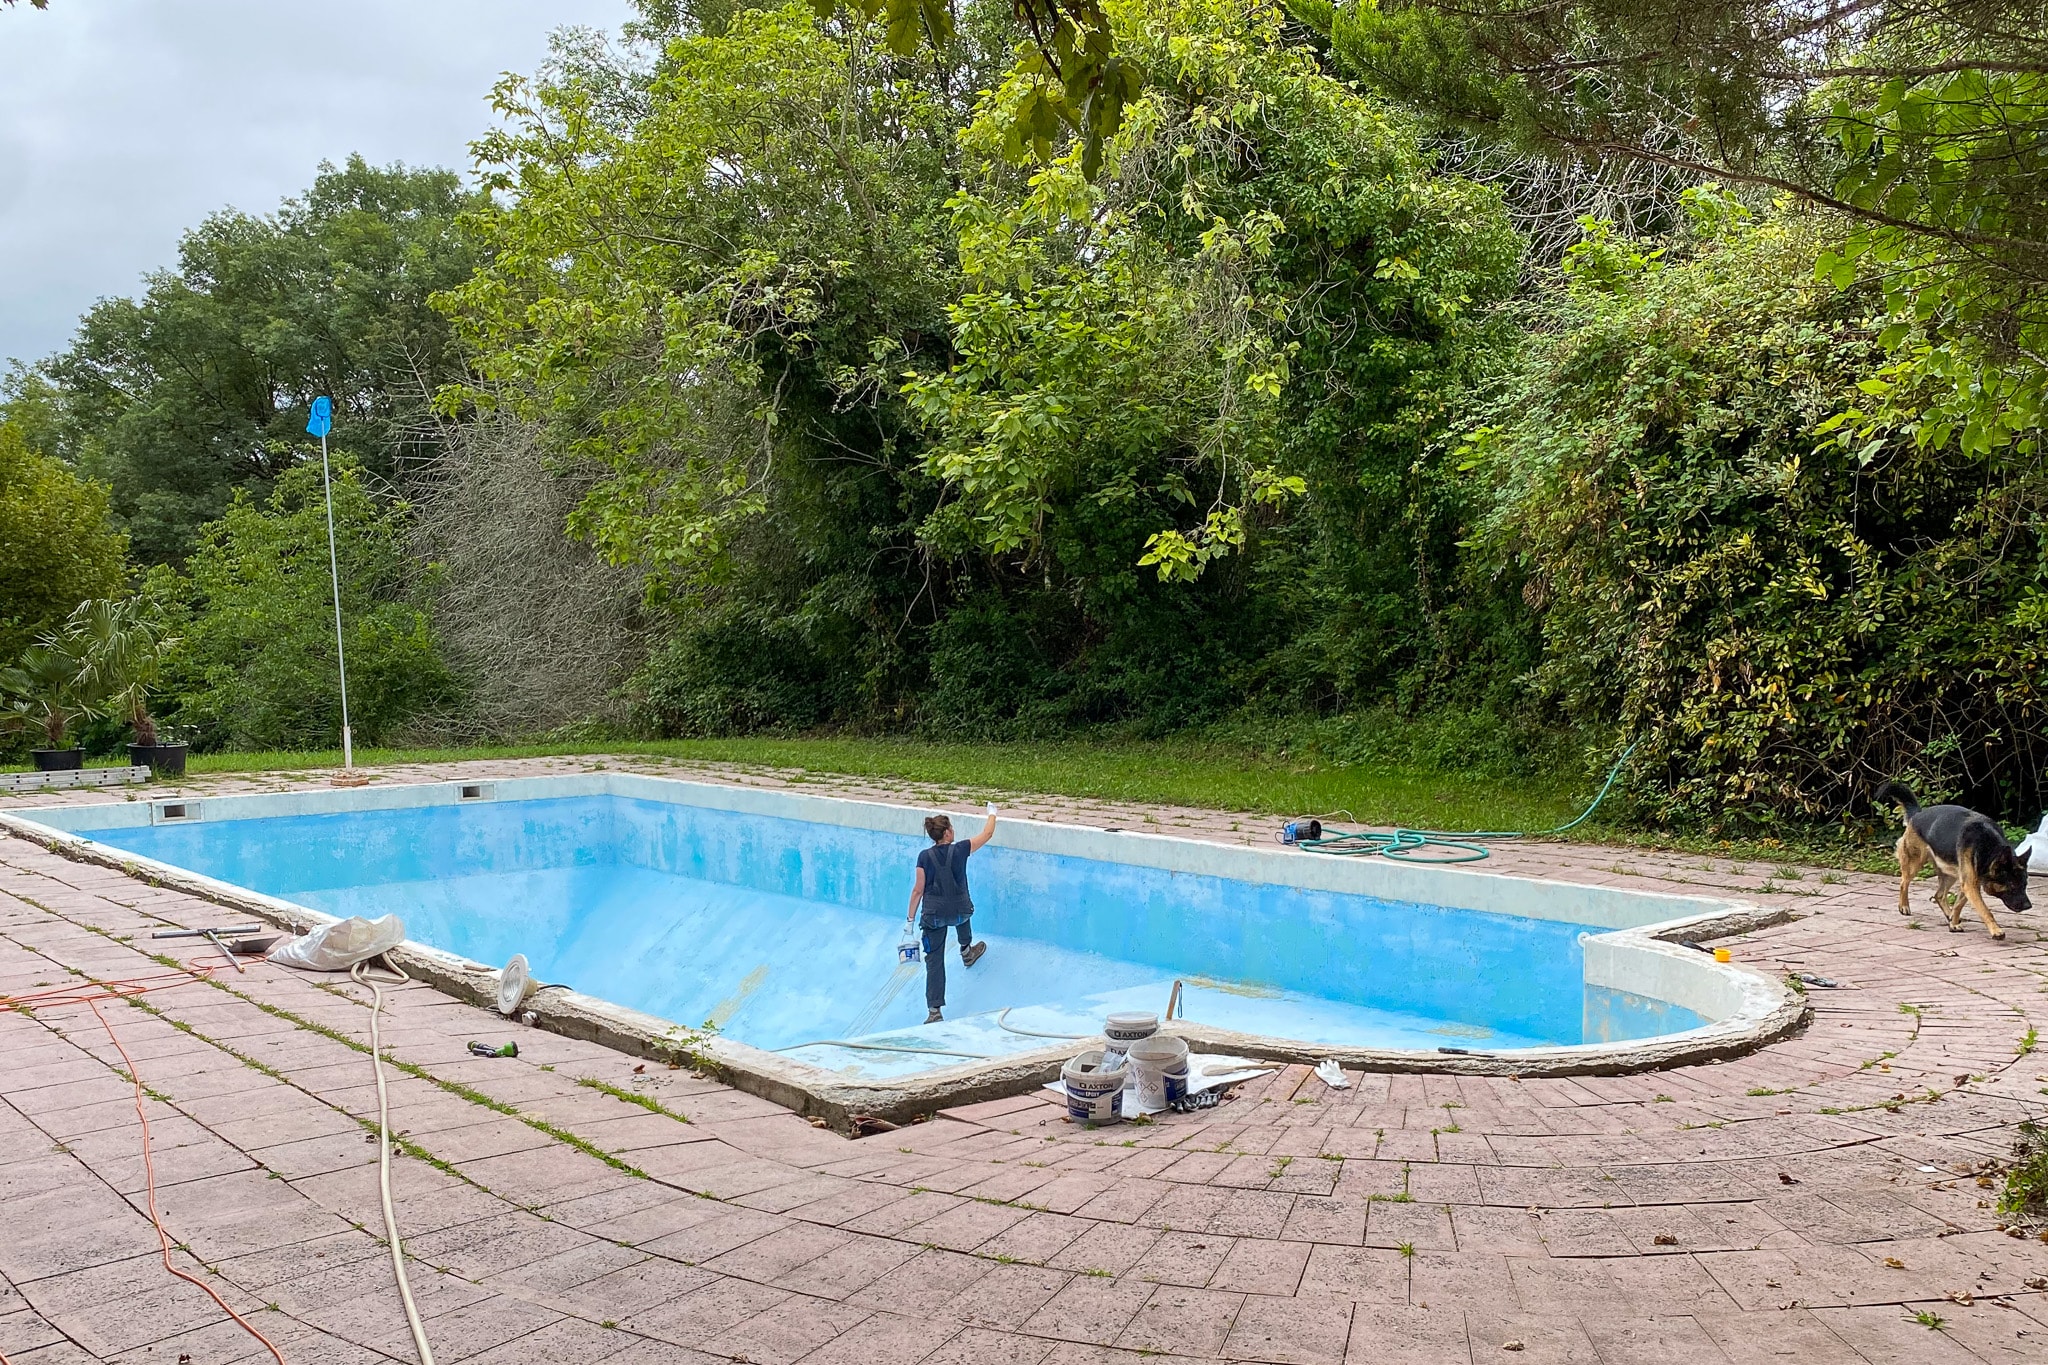 Pool being renovated